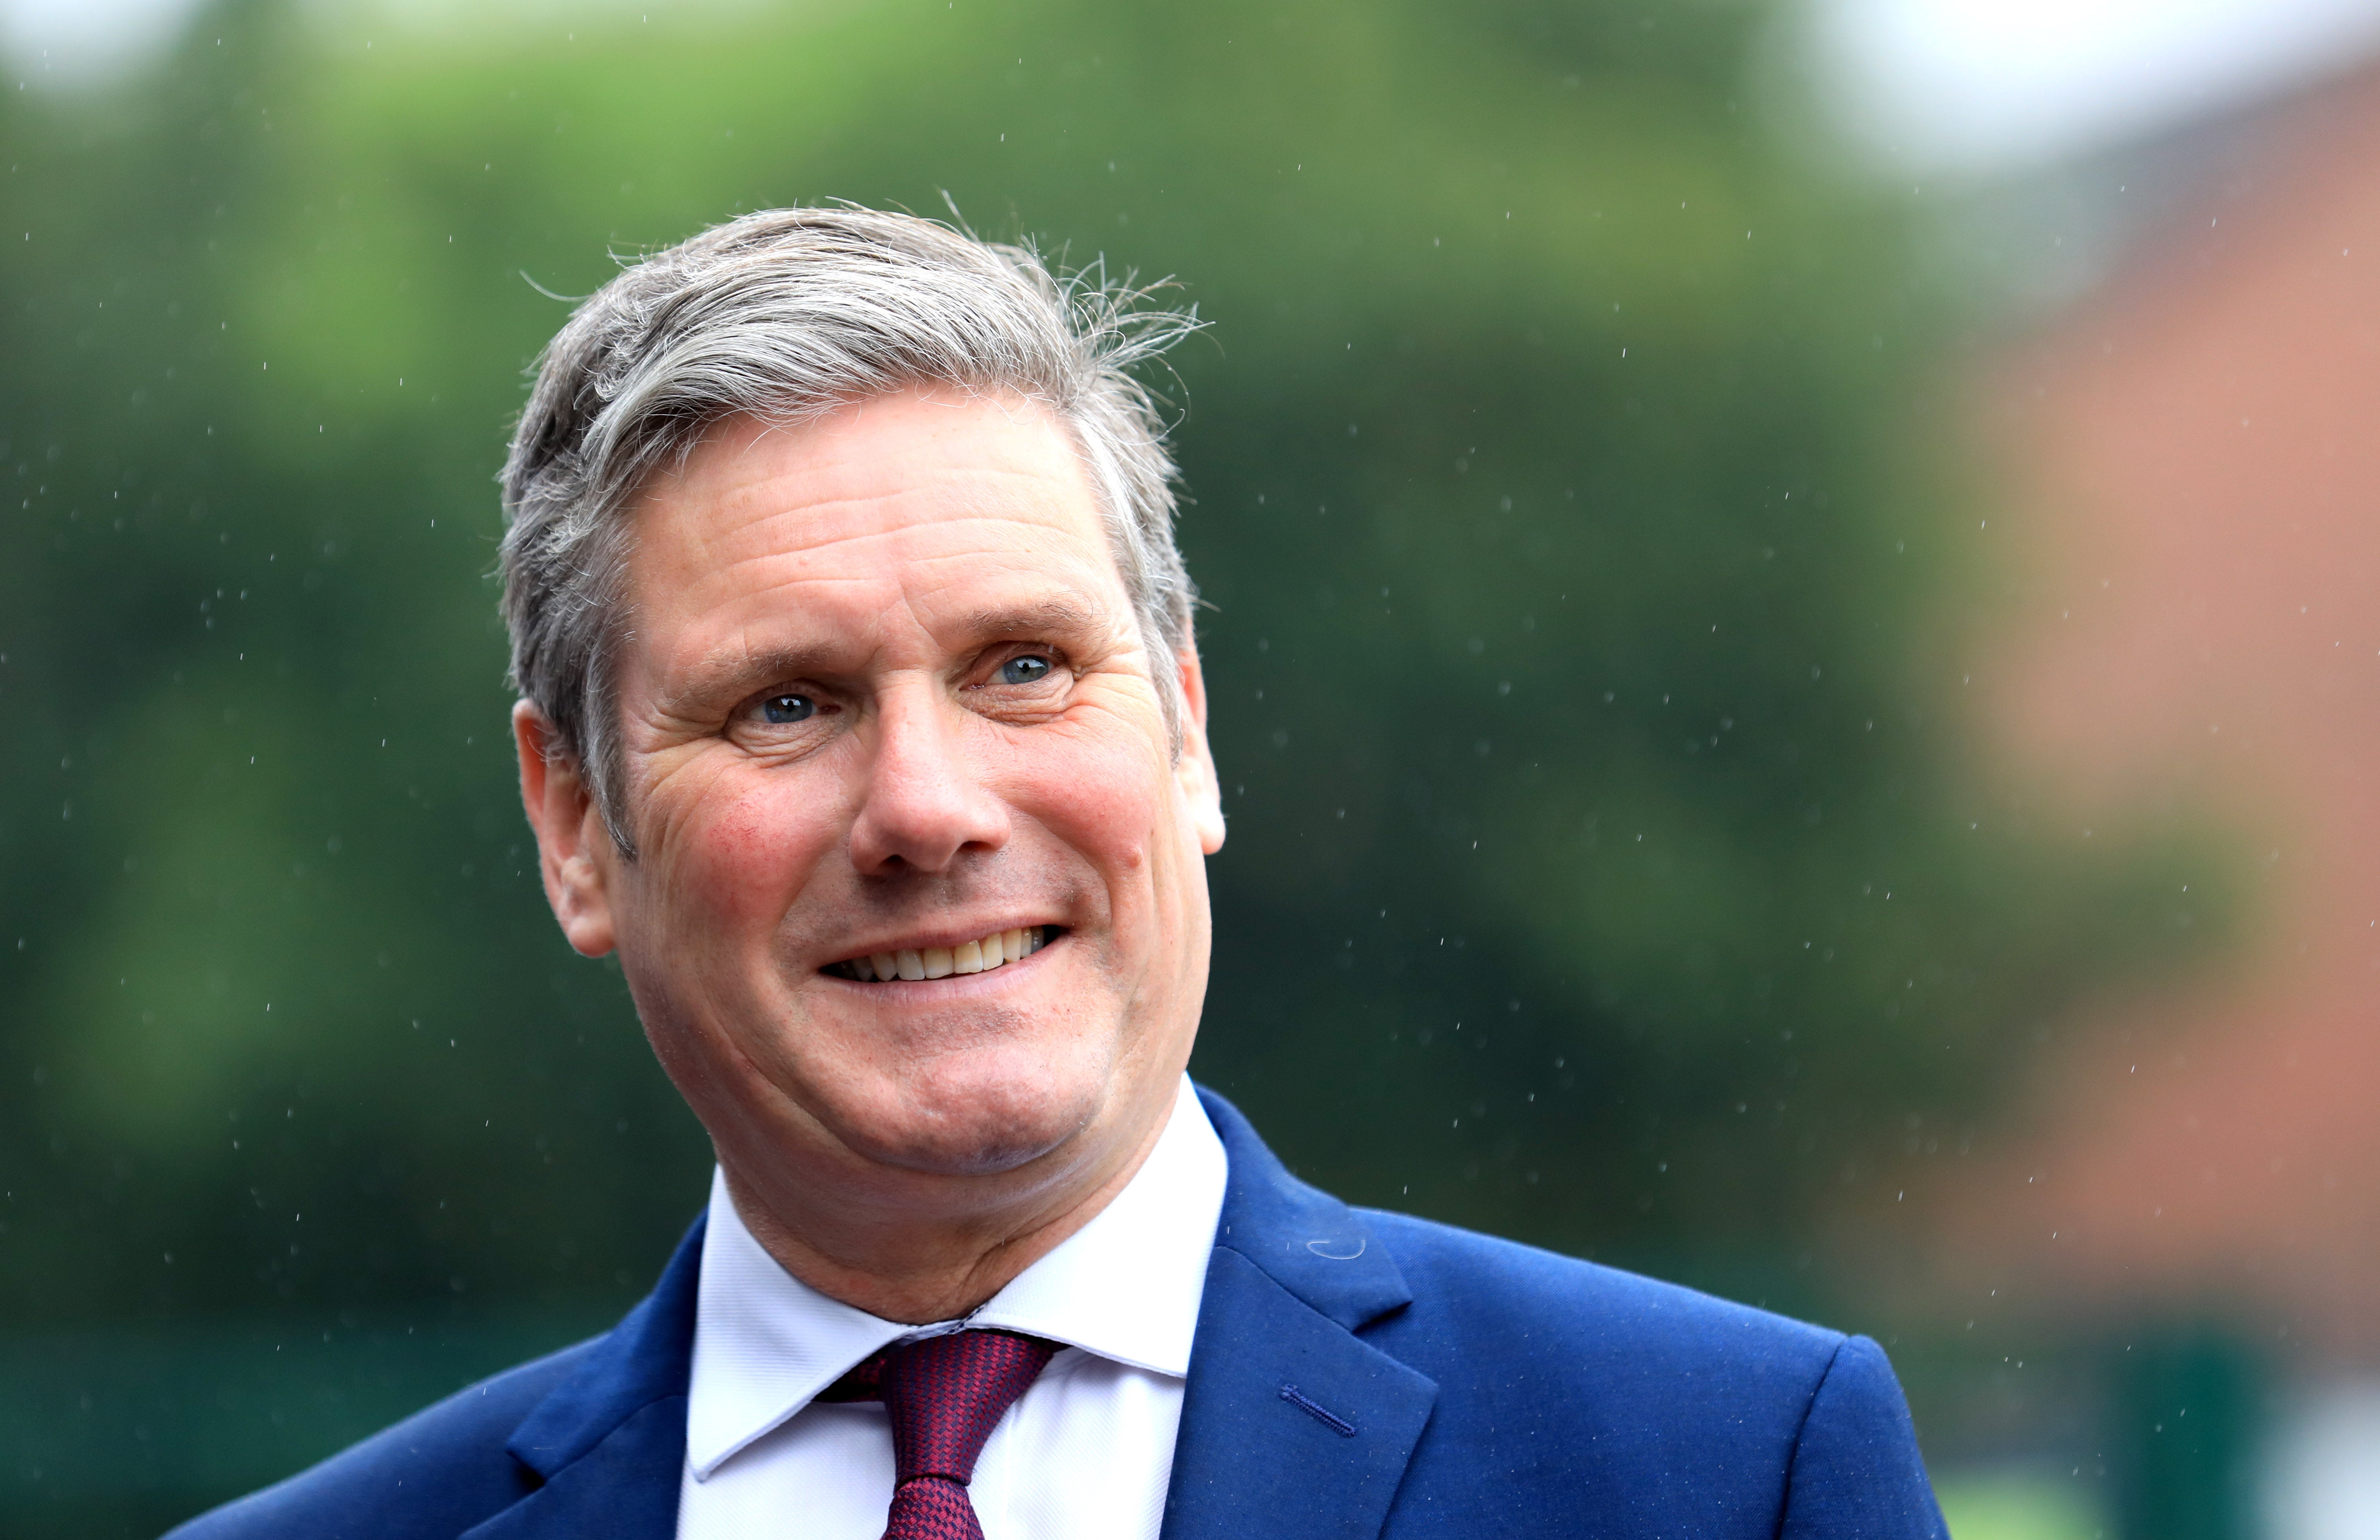 Starmer intends to put the change to the party at conference